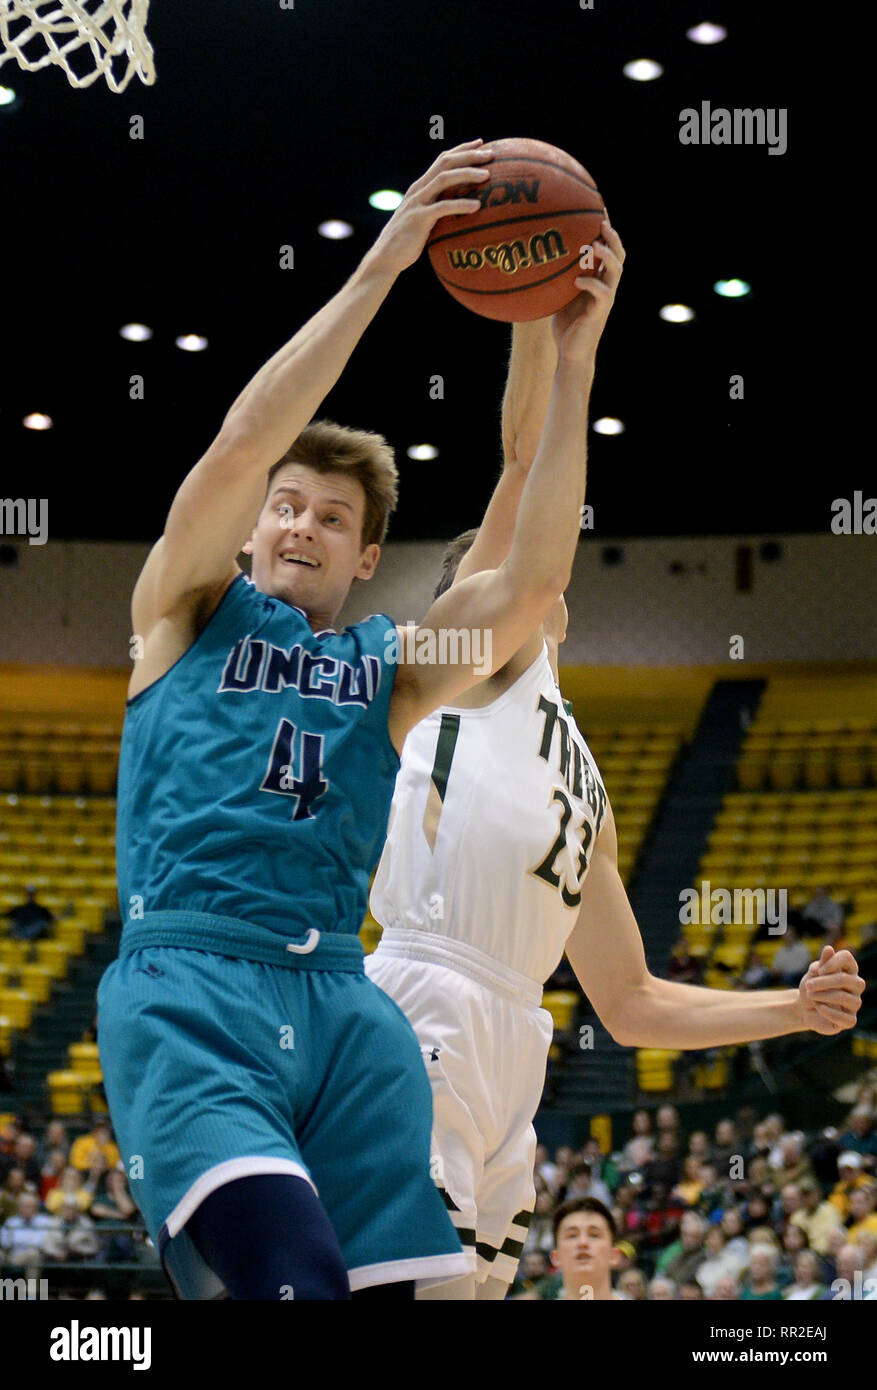 Williamsburg, VA, USA. 23rd Feb, 2019. 20190223 - UNCW forward SHAWN O'CONNELL (4) grabs a rebound against William and Mary forward JUSTIN PIERCE (23) in the first half at Kaplan Arena in Williamsburg, Va. Credit: Chuck Myers/ZUMA Wire/Alamy Live News Stock Photo